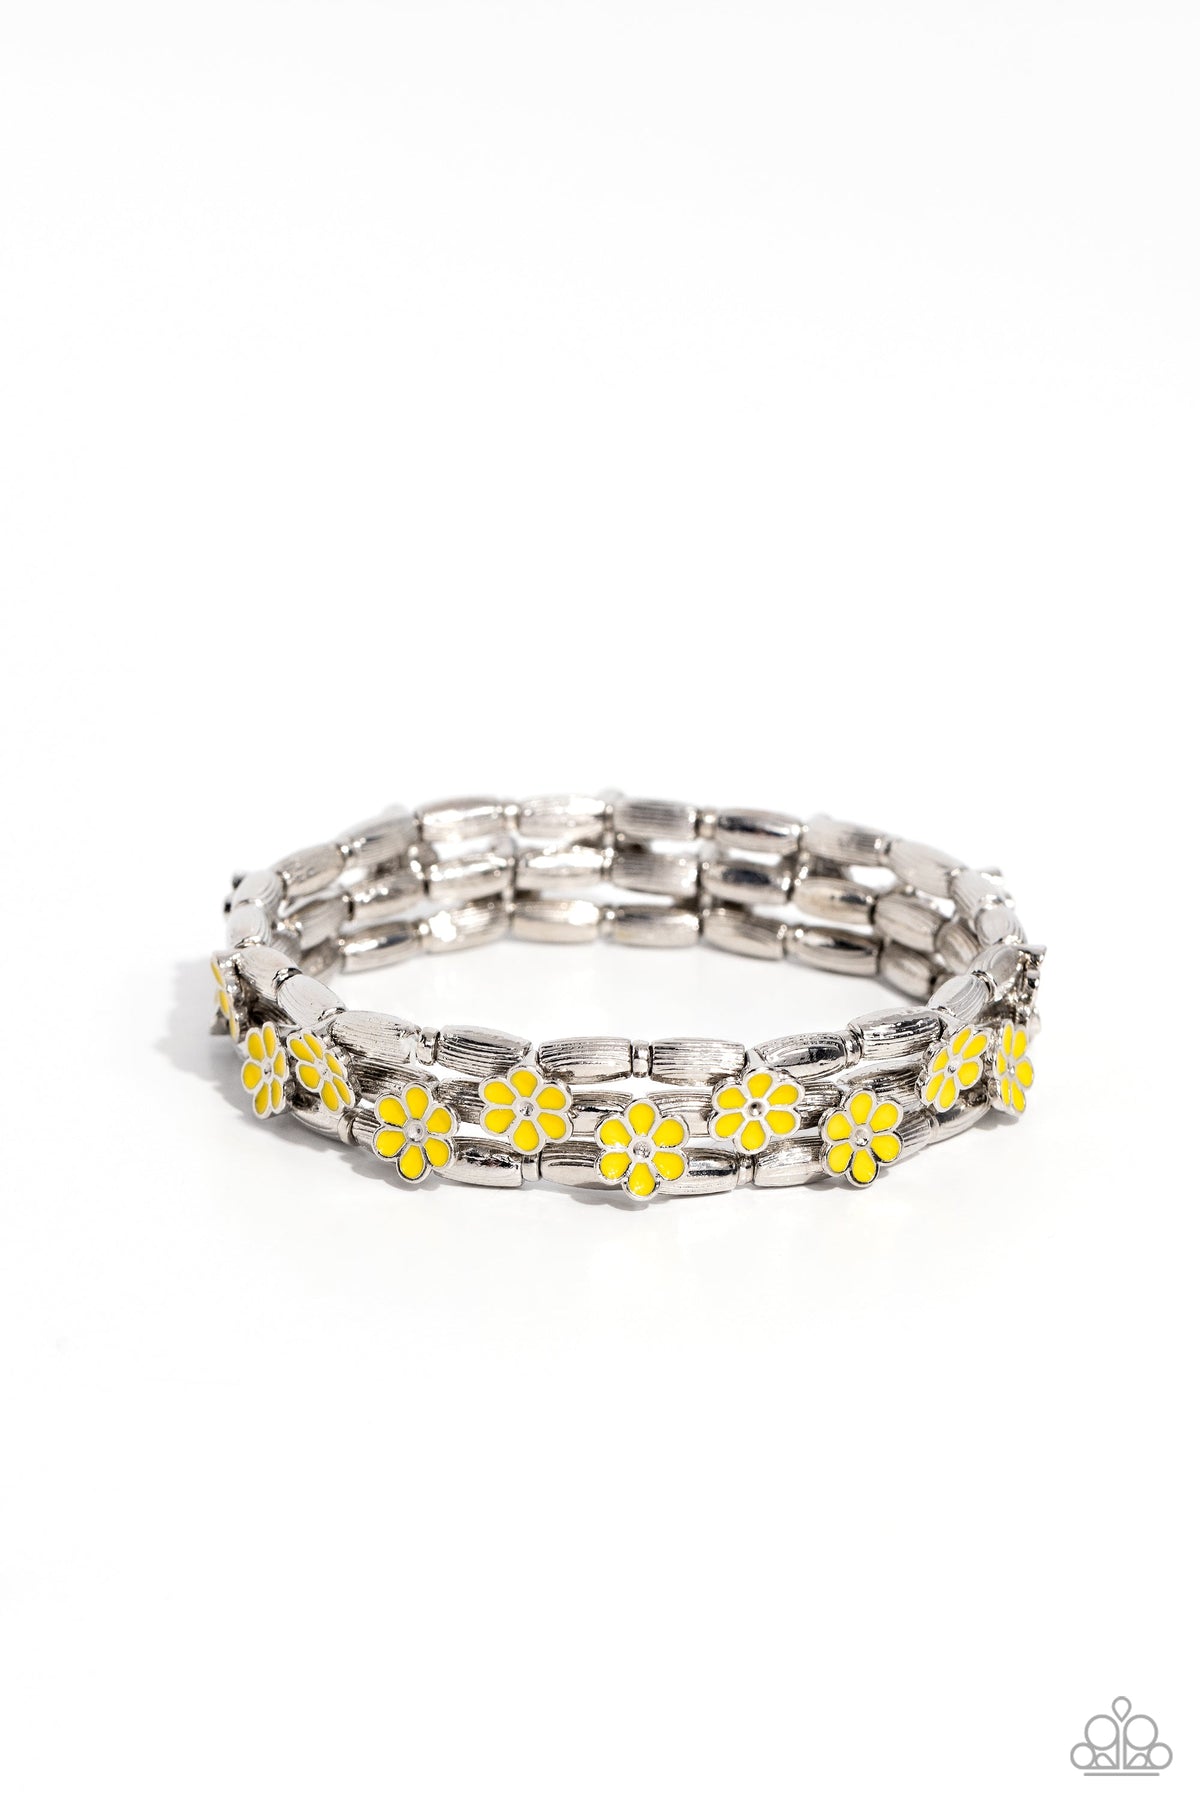 Scattered Springtime Yellow Flower Bracelet - Paparazzi Accessories- lightbox - CarasShop.com - $5 Jewelry by Cara Jewels